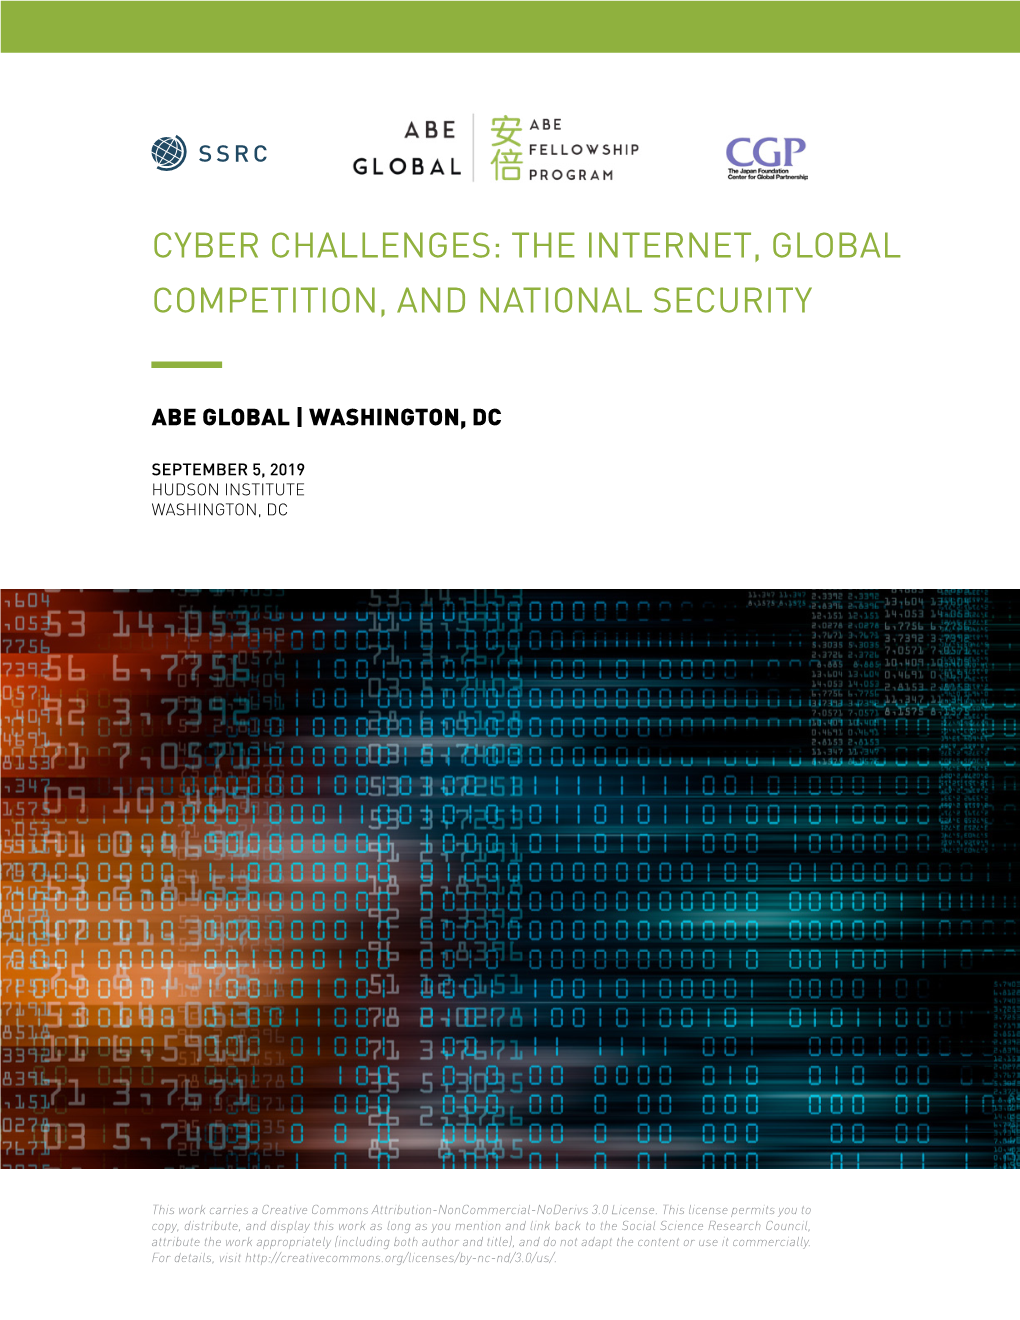 Cyber Challenges: the Internet, Global Competition, and National Security